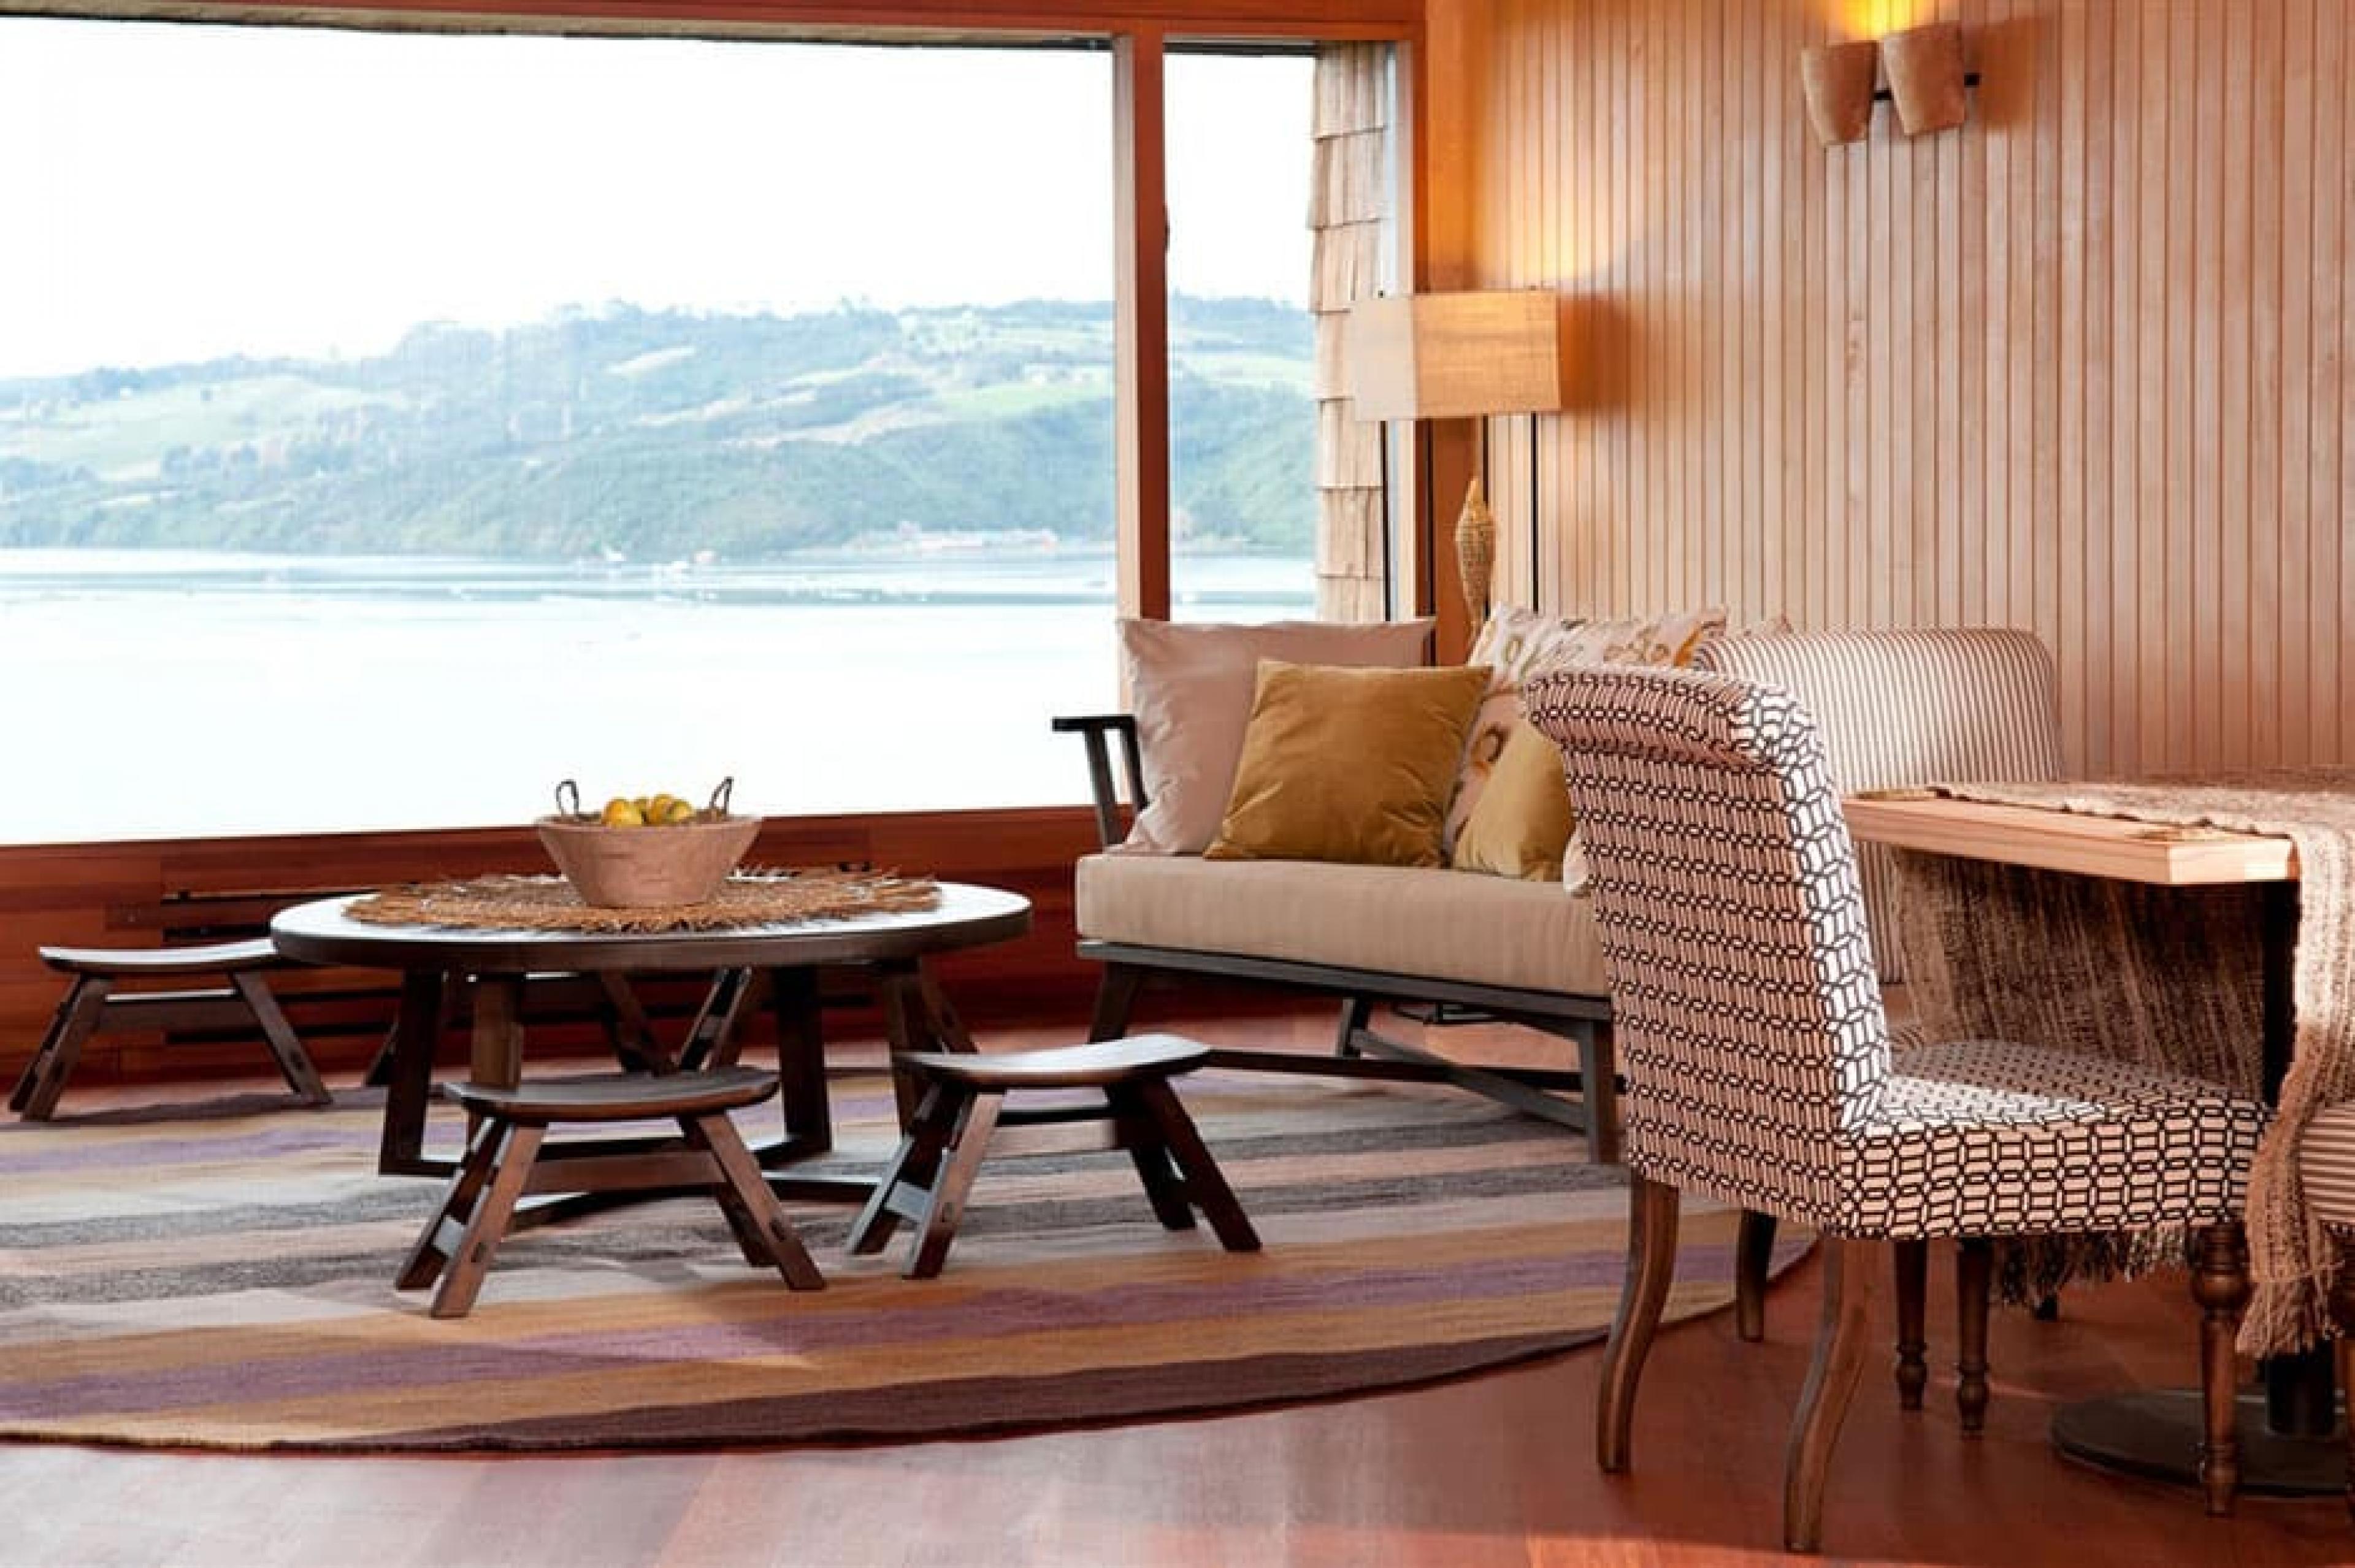 View from Living Room at Tierra Chiloé, Chilean Patagonia, Chile